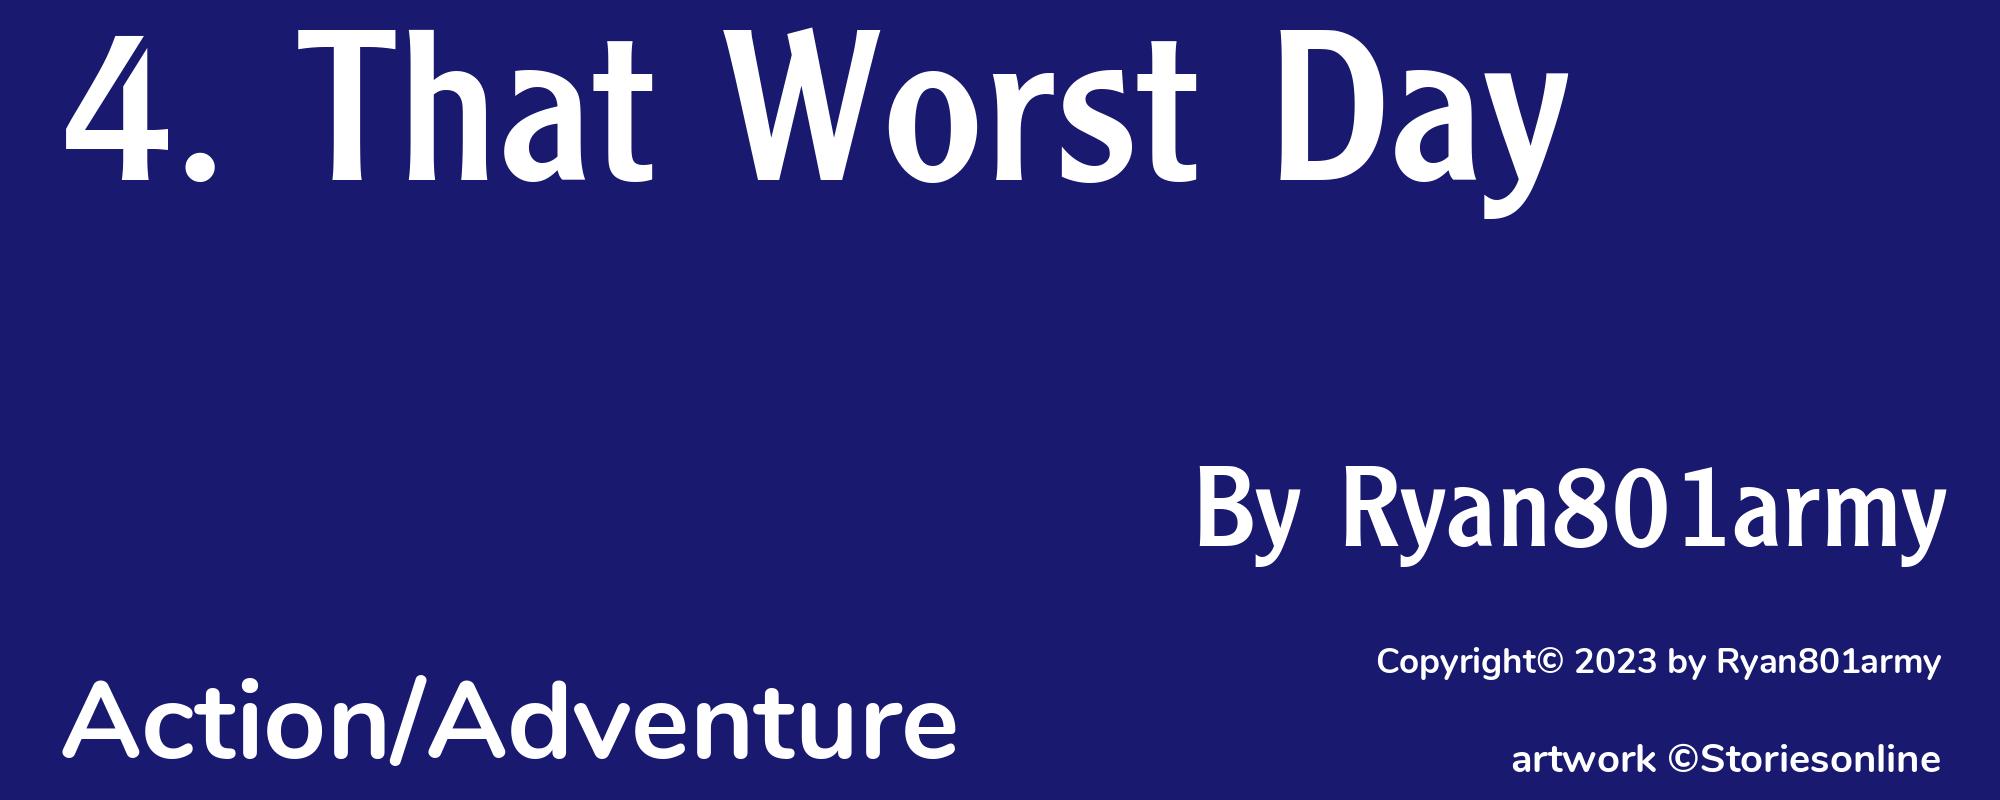 4. That Worst Day - Cover